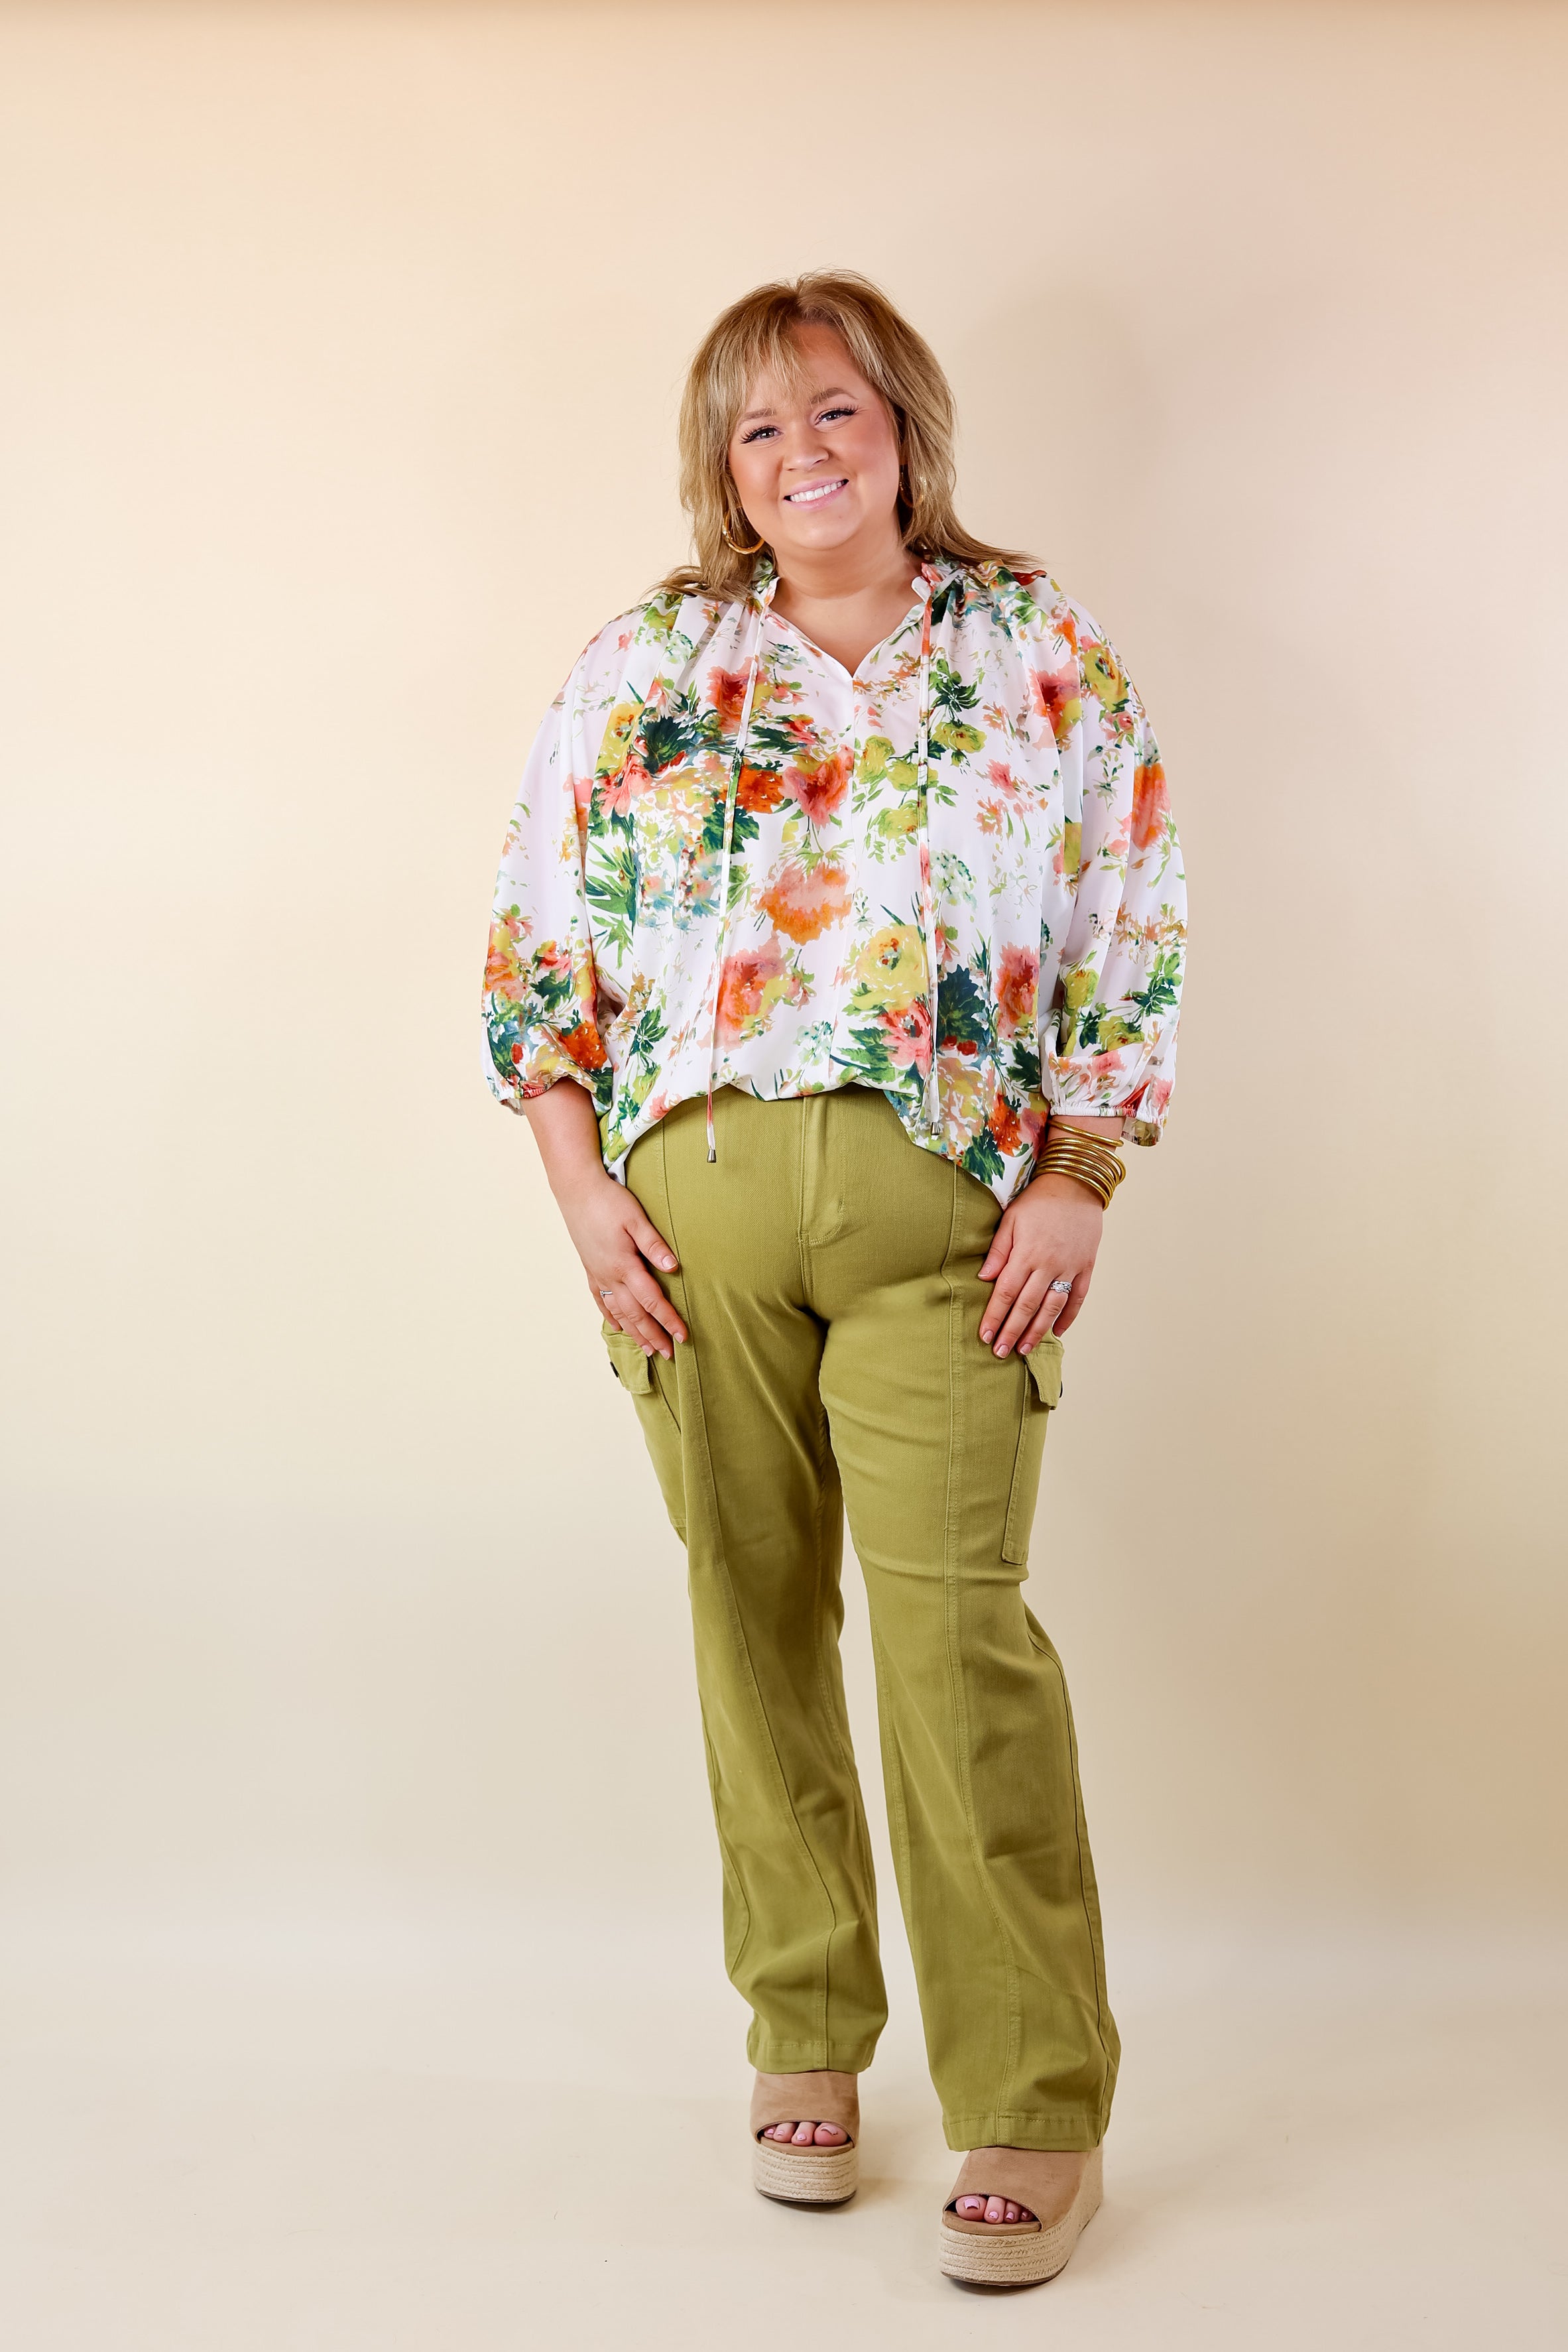 Hampton Hideout Floral Blouse with Keyhole and Tie Neckline in Off White - Giddy Up Glamour Boutique